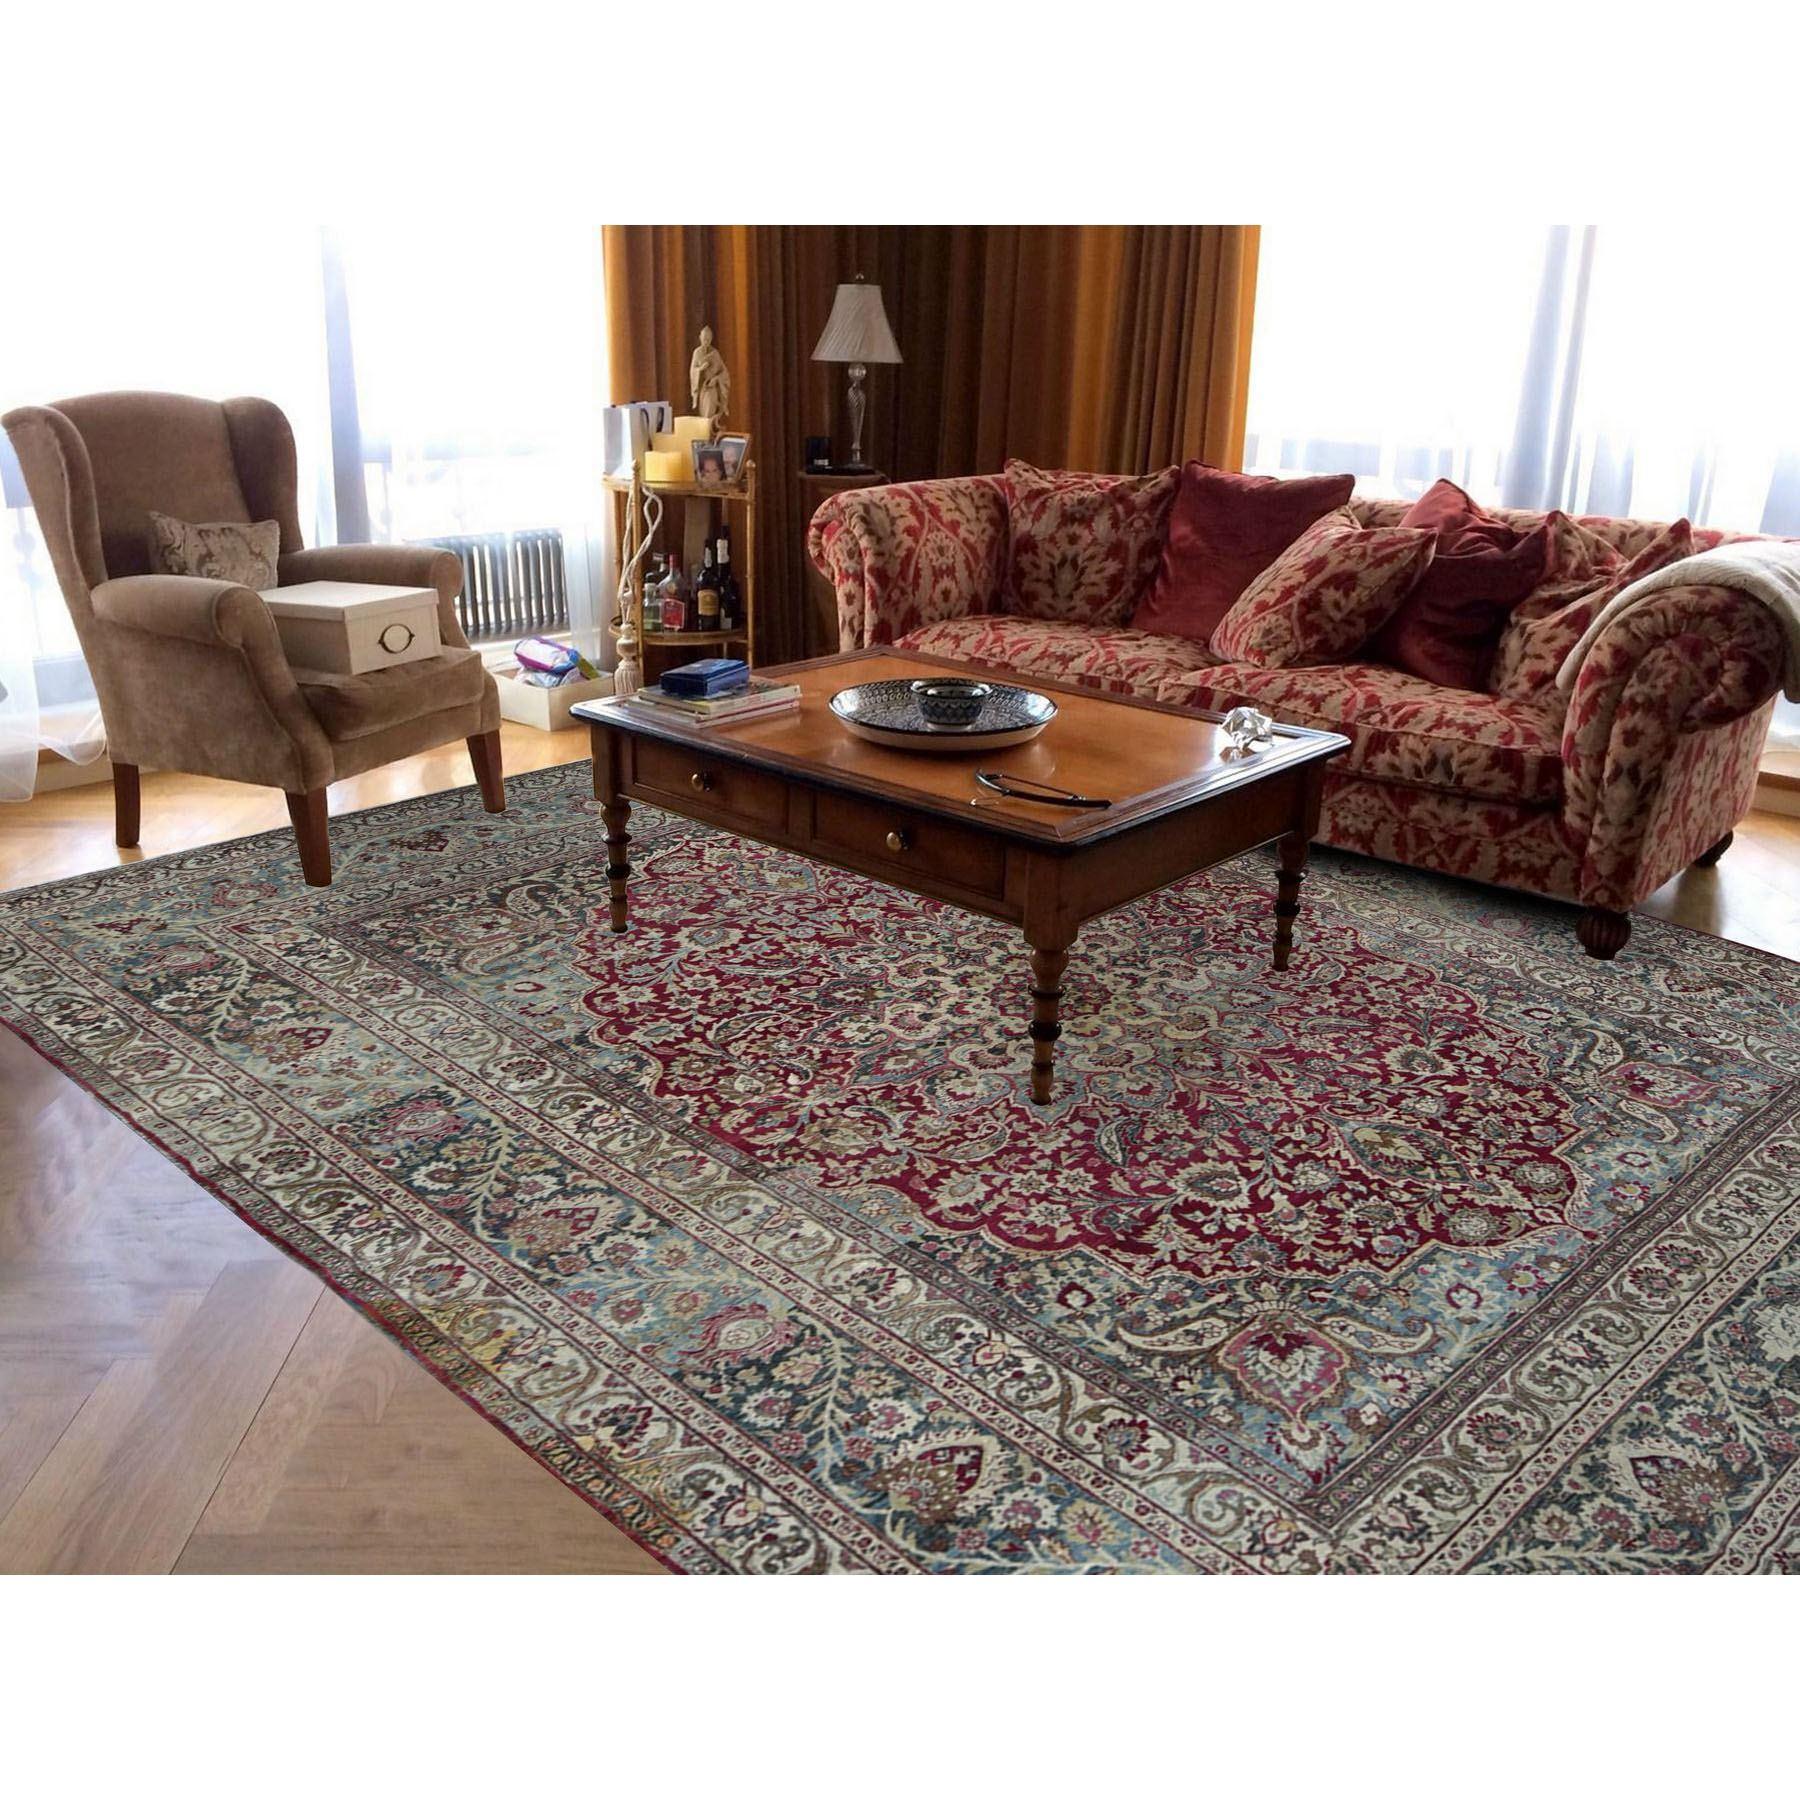 This fabulous Hand-Knotted carpet has been created and designed for extra strength and durability. This rug has been handcrafted for weeks in the traditional method that is used to make
Exact Rug Size in Feet and Inches : 8'9